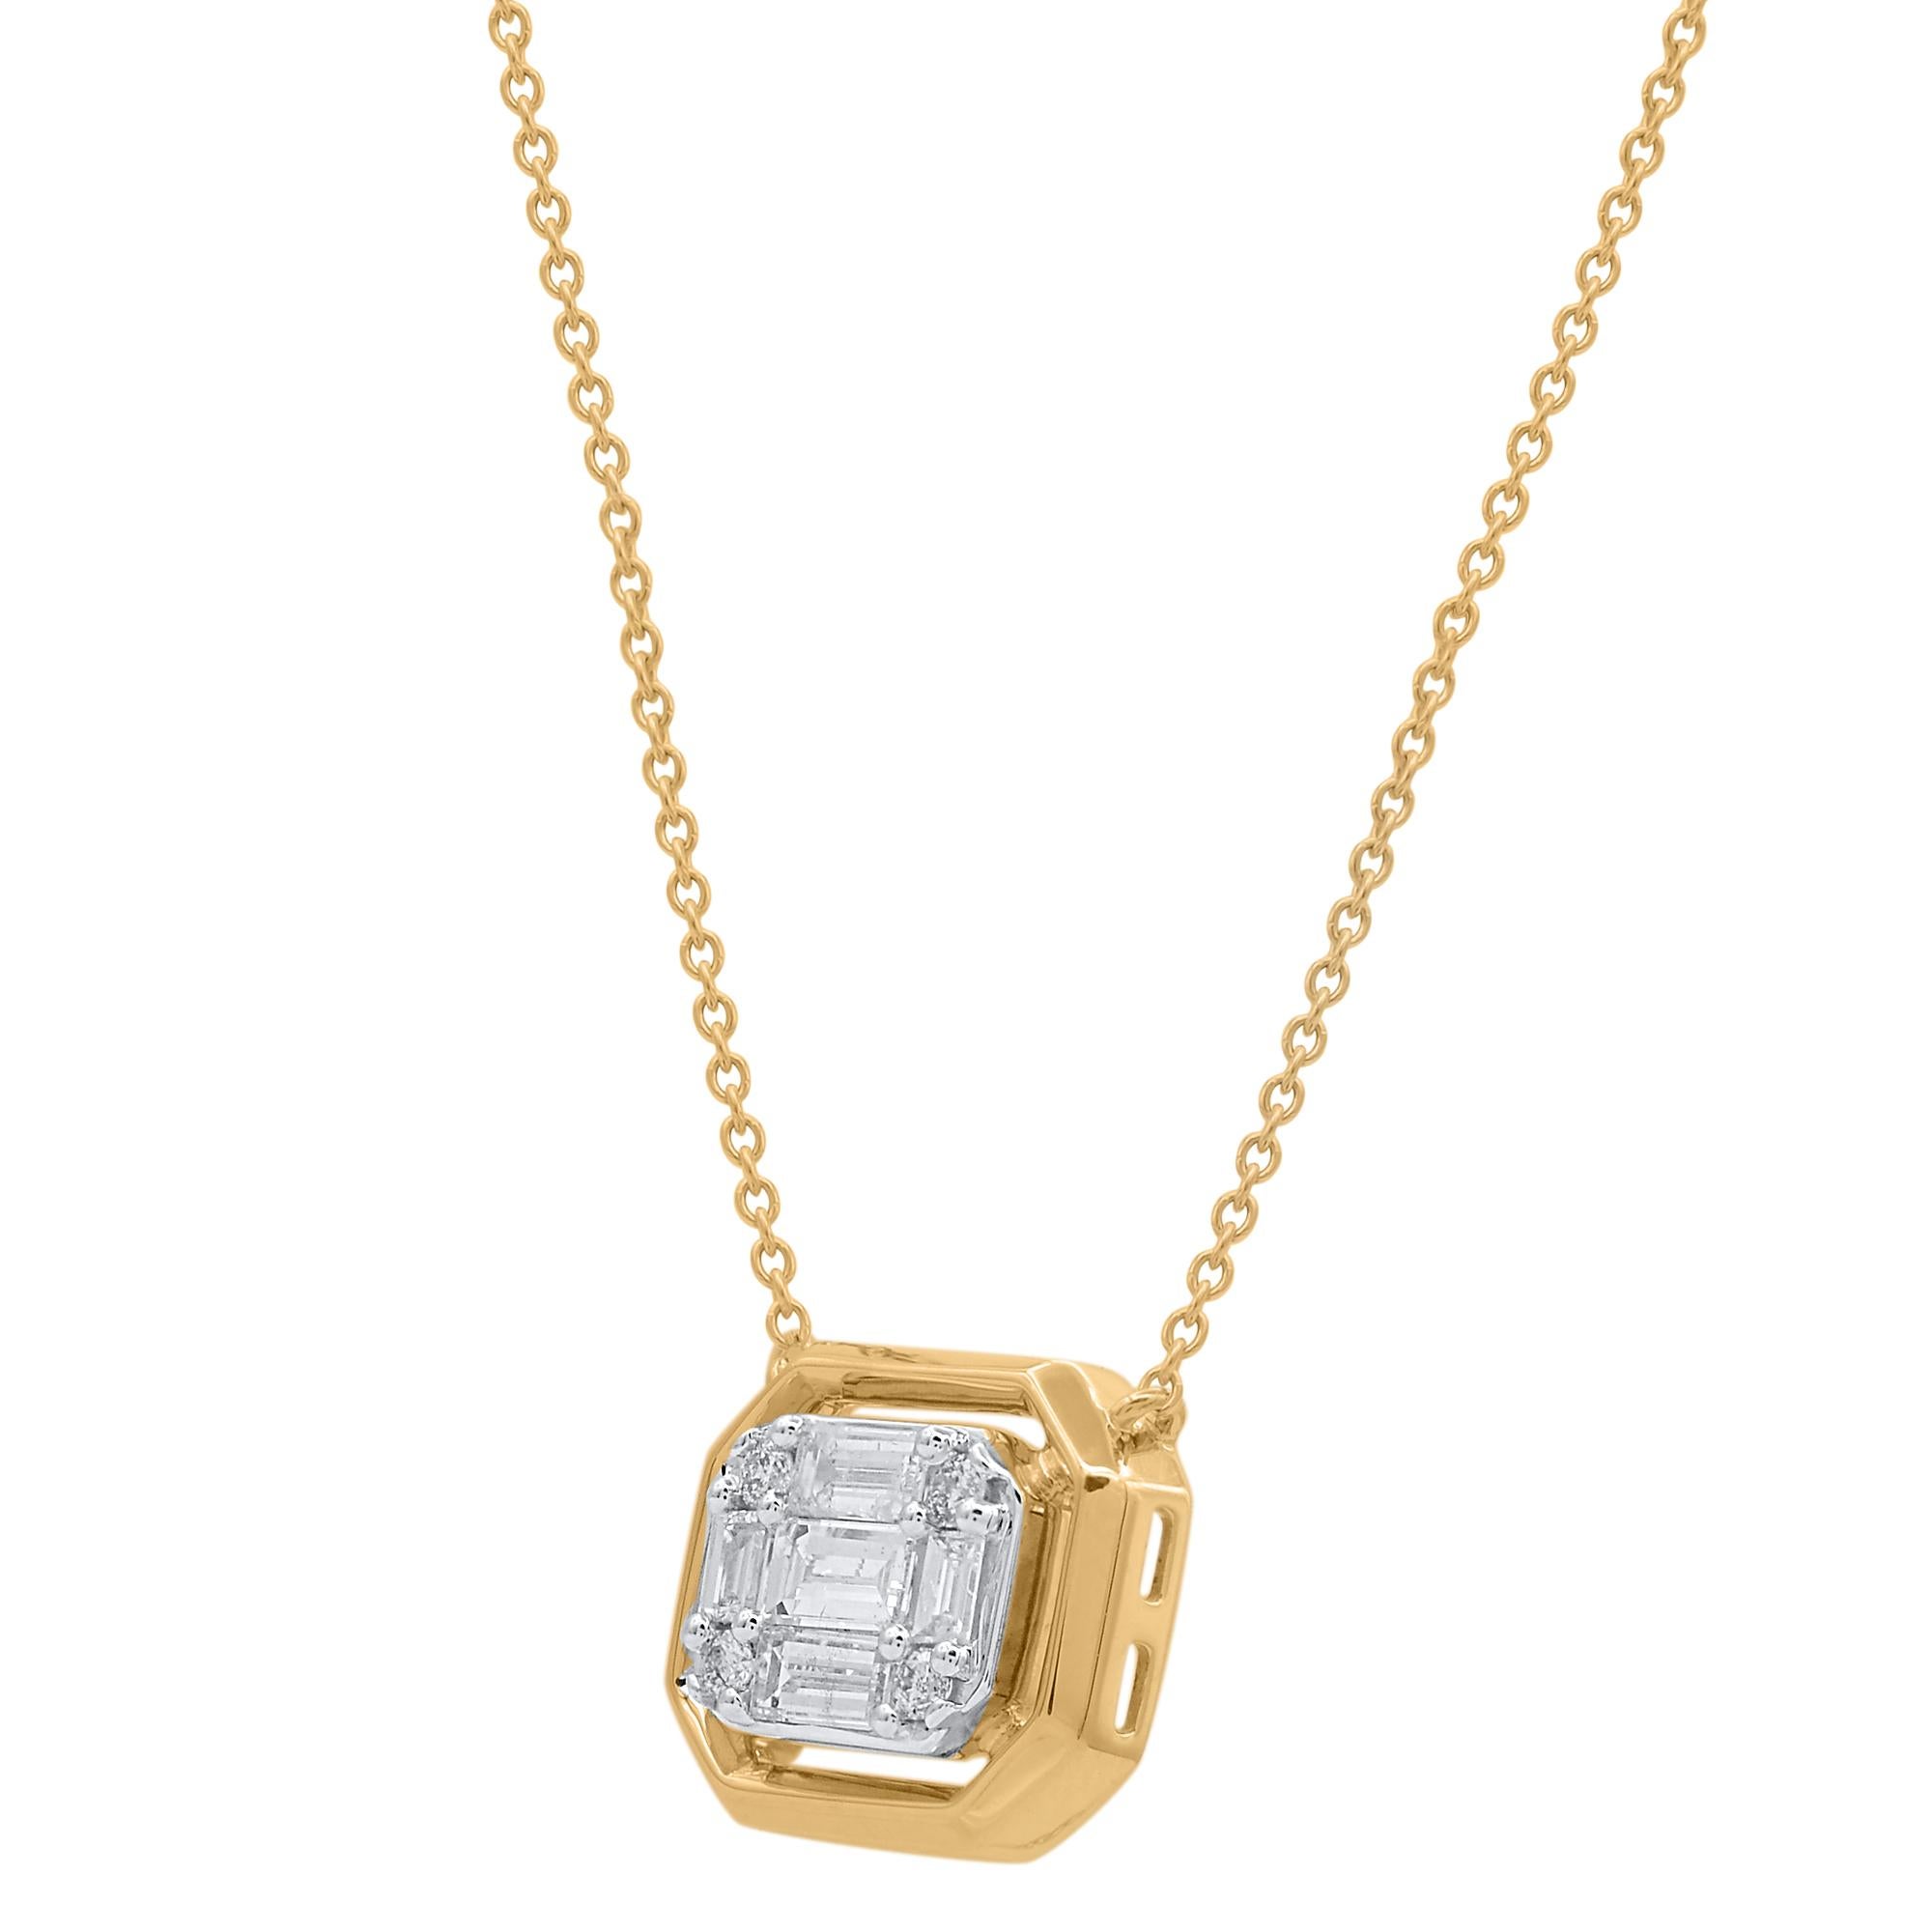 Make a favorable impression with this elegant  diamond pendant. These emerald cut pendant are studded with 4 Brilliant Cut & 5 Baguette diamonds in 14kt yellow gold in prong setting. Diamonds are graded as H-I color and I-2 clarity. Pendant suspends